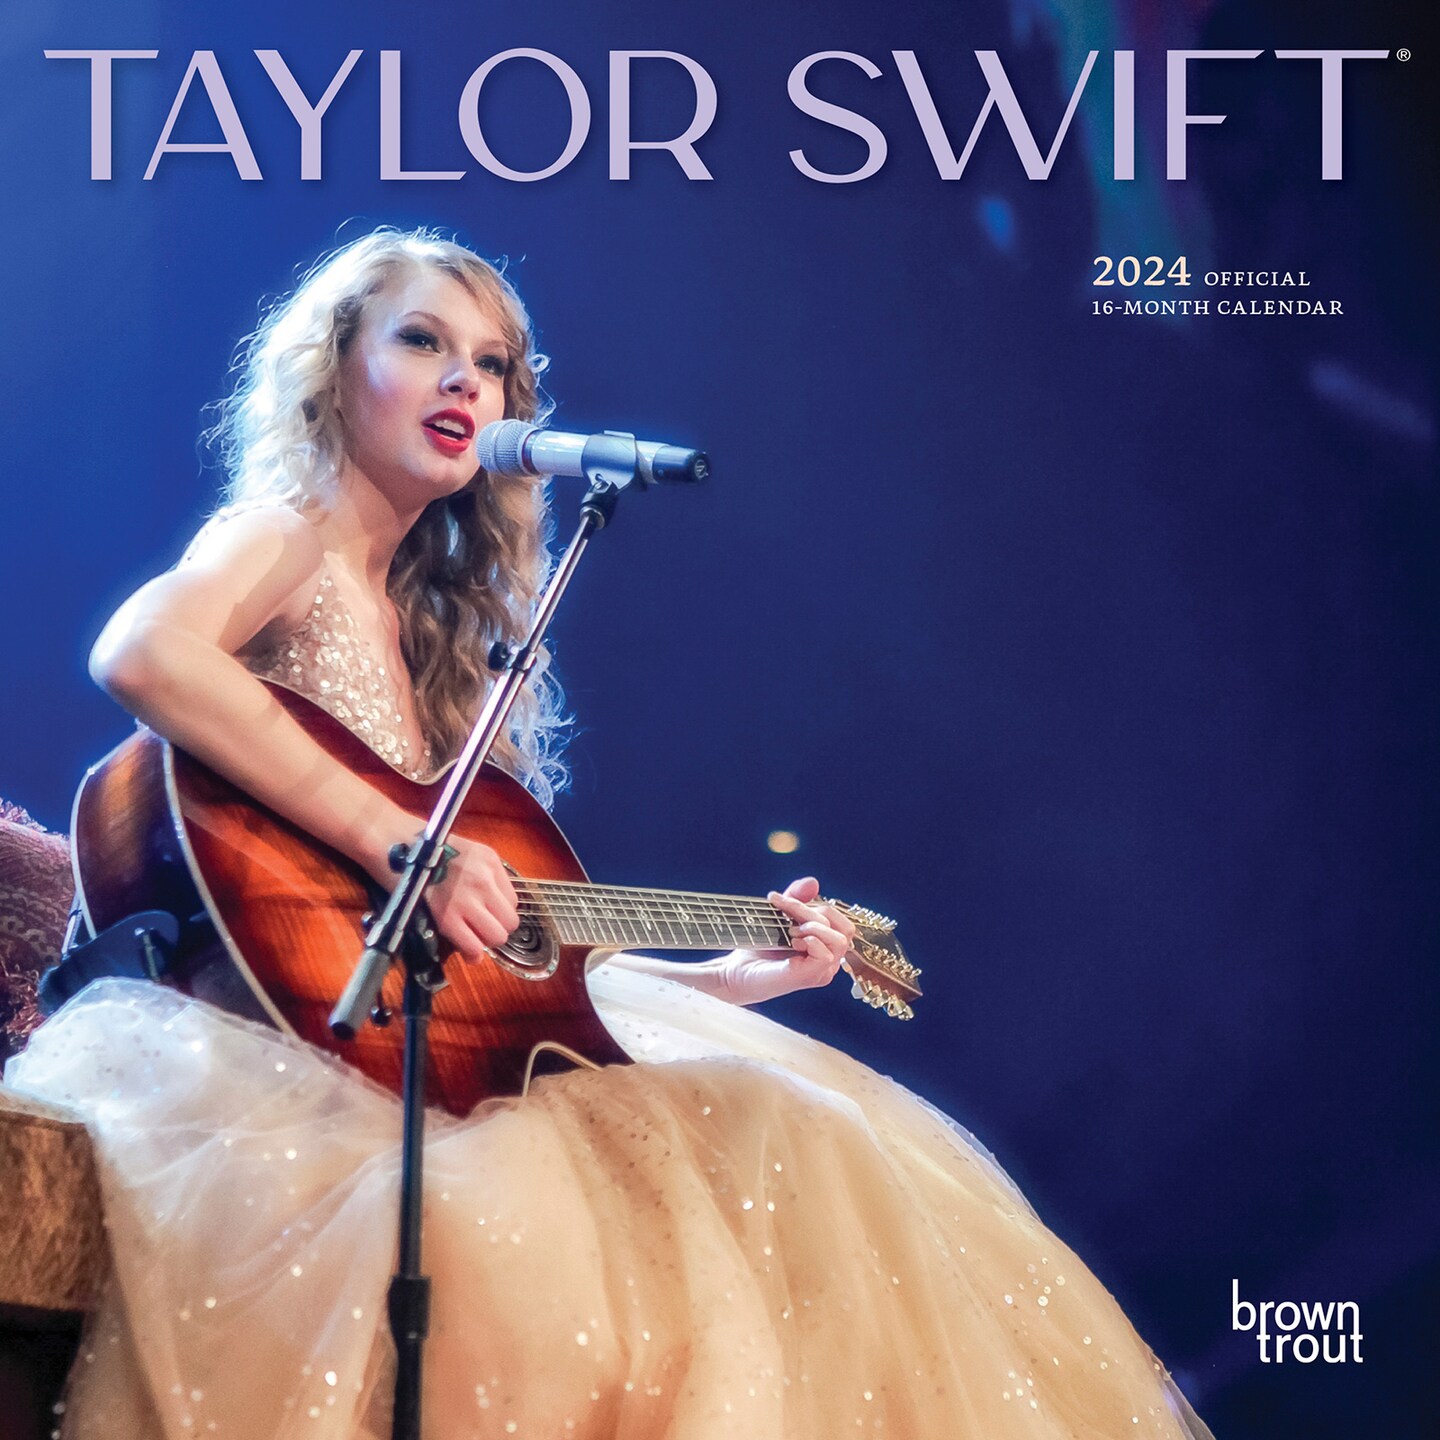 Albums As Books Tote Bag Taylor Swift - Trends Bedding